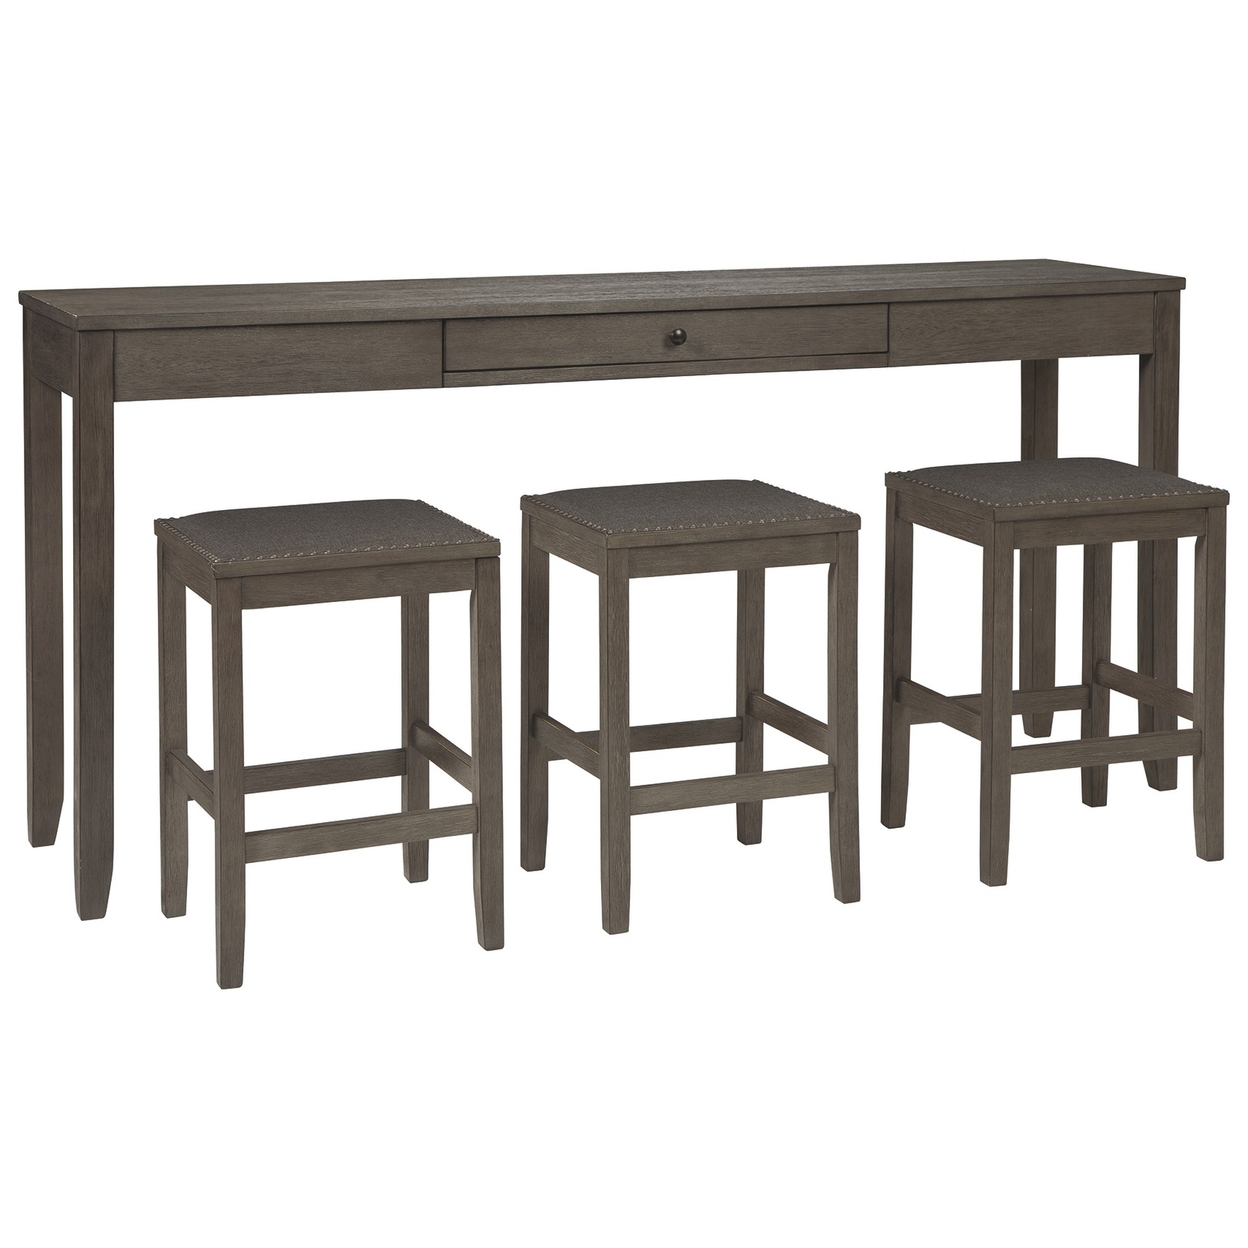 4 Piece Counter Height Dining Table Set With Barstool, Gray- Saltoro Sherpi